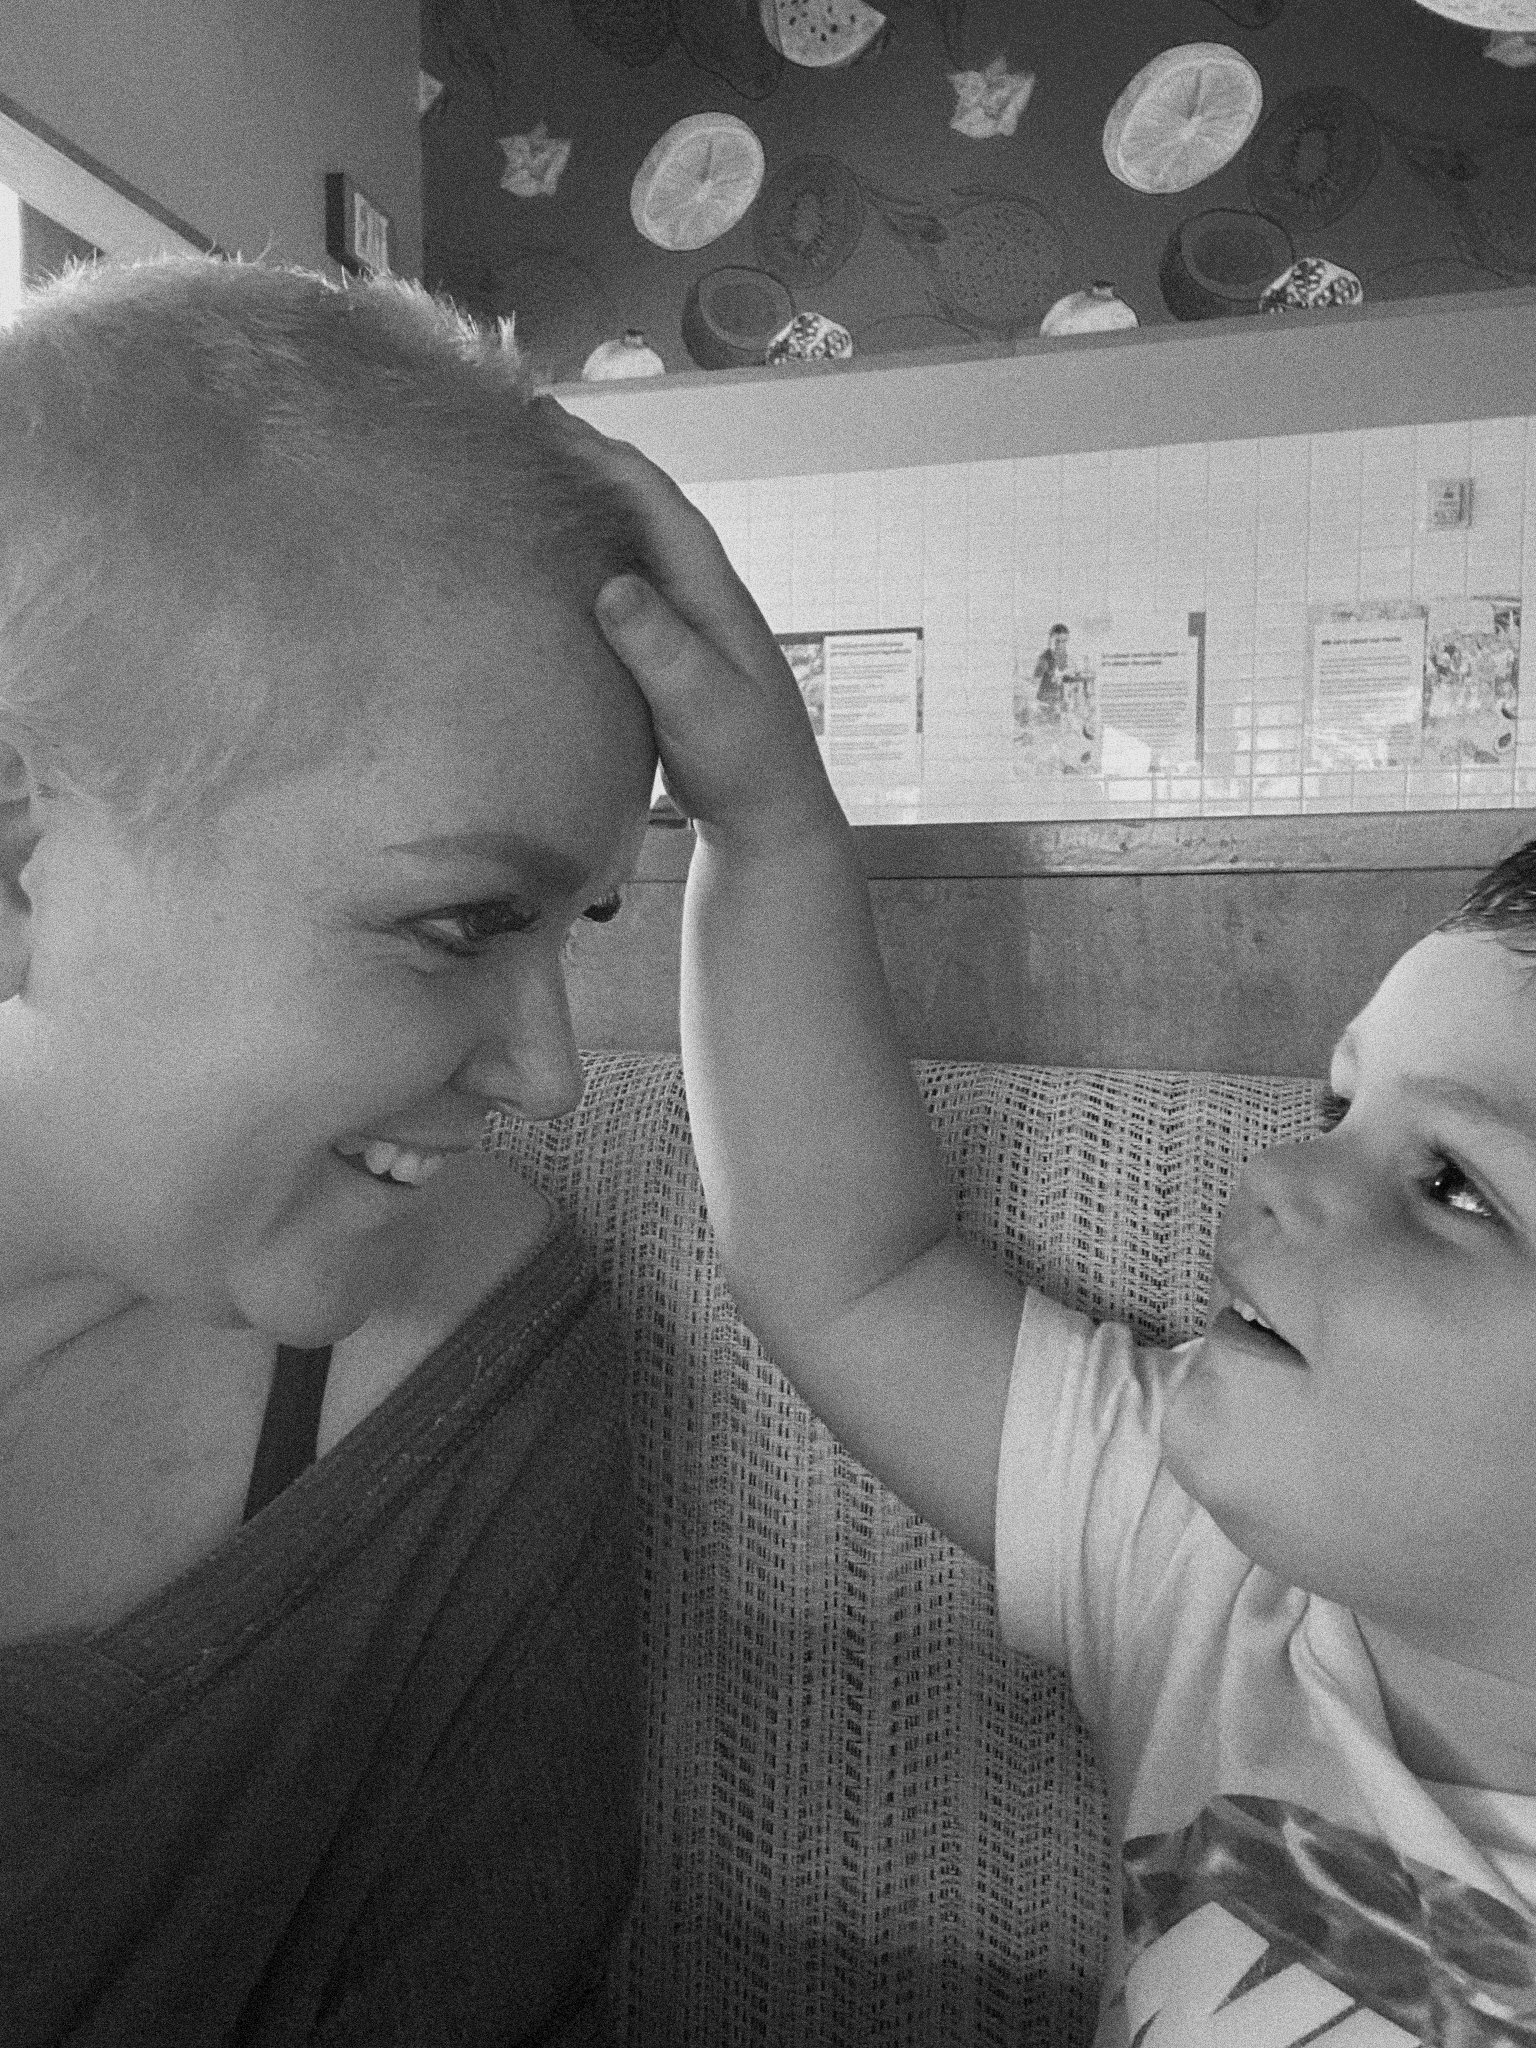 Savannah and her son smiling with her son touching her shaved head